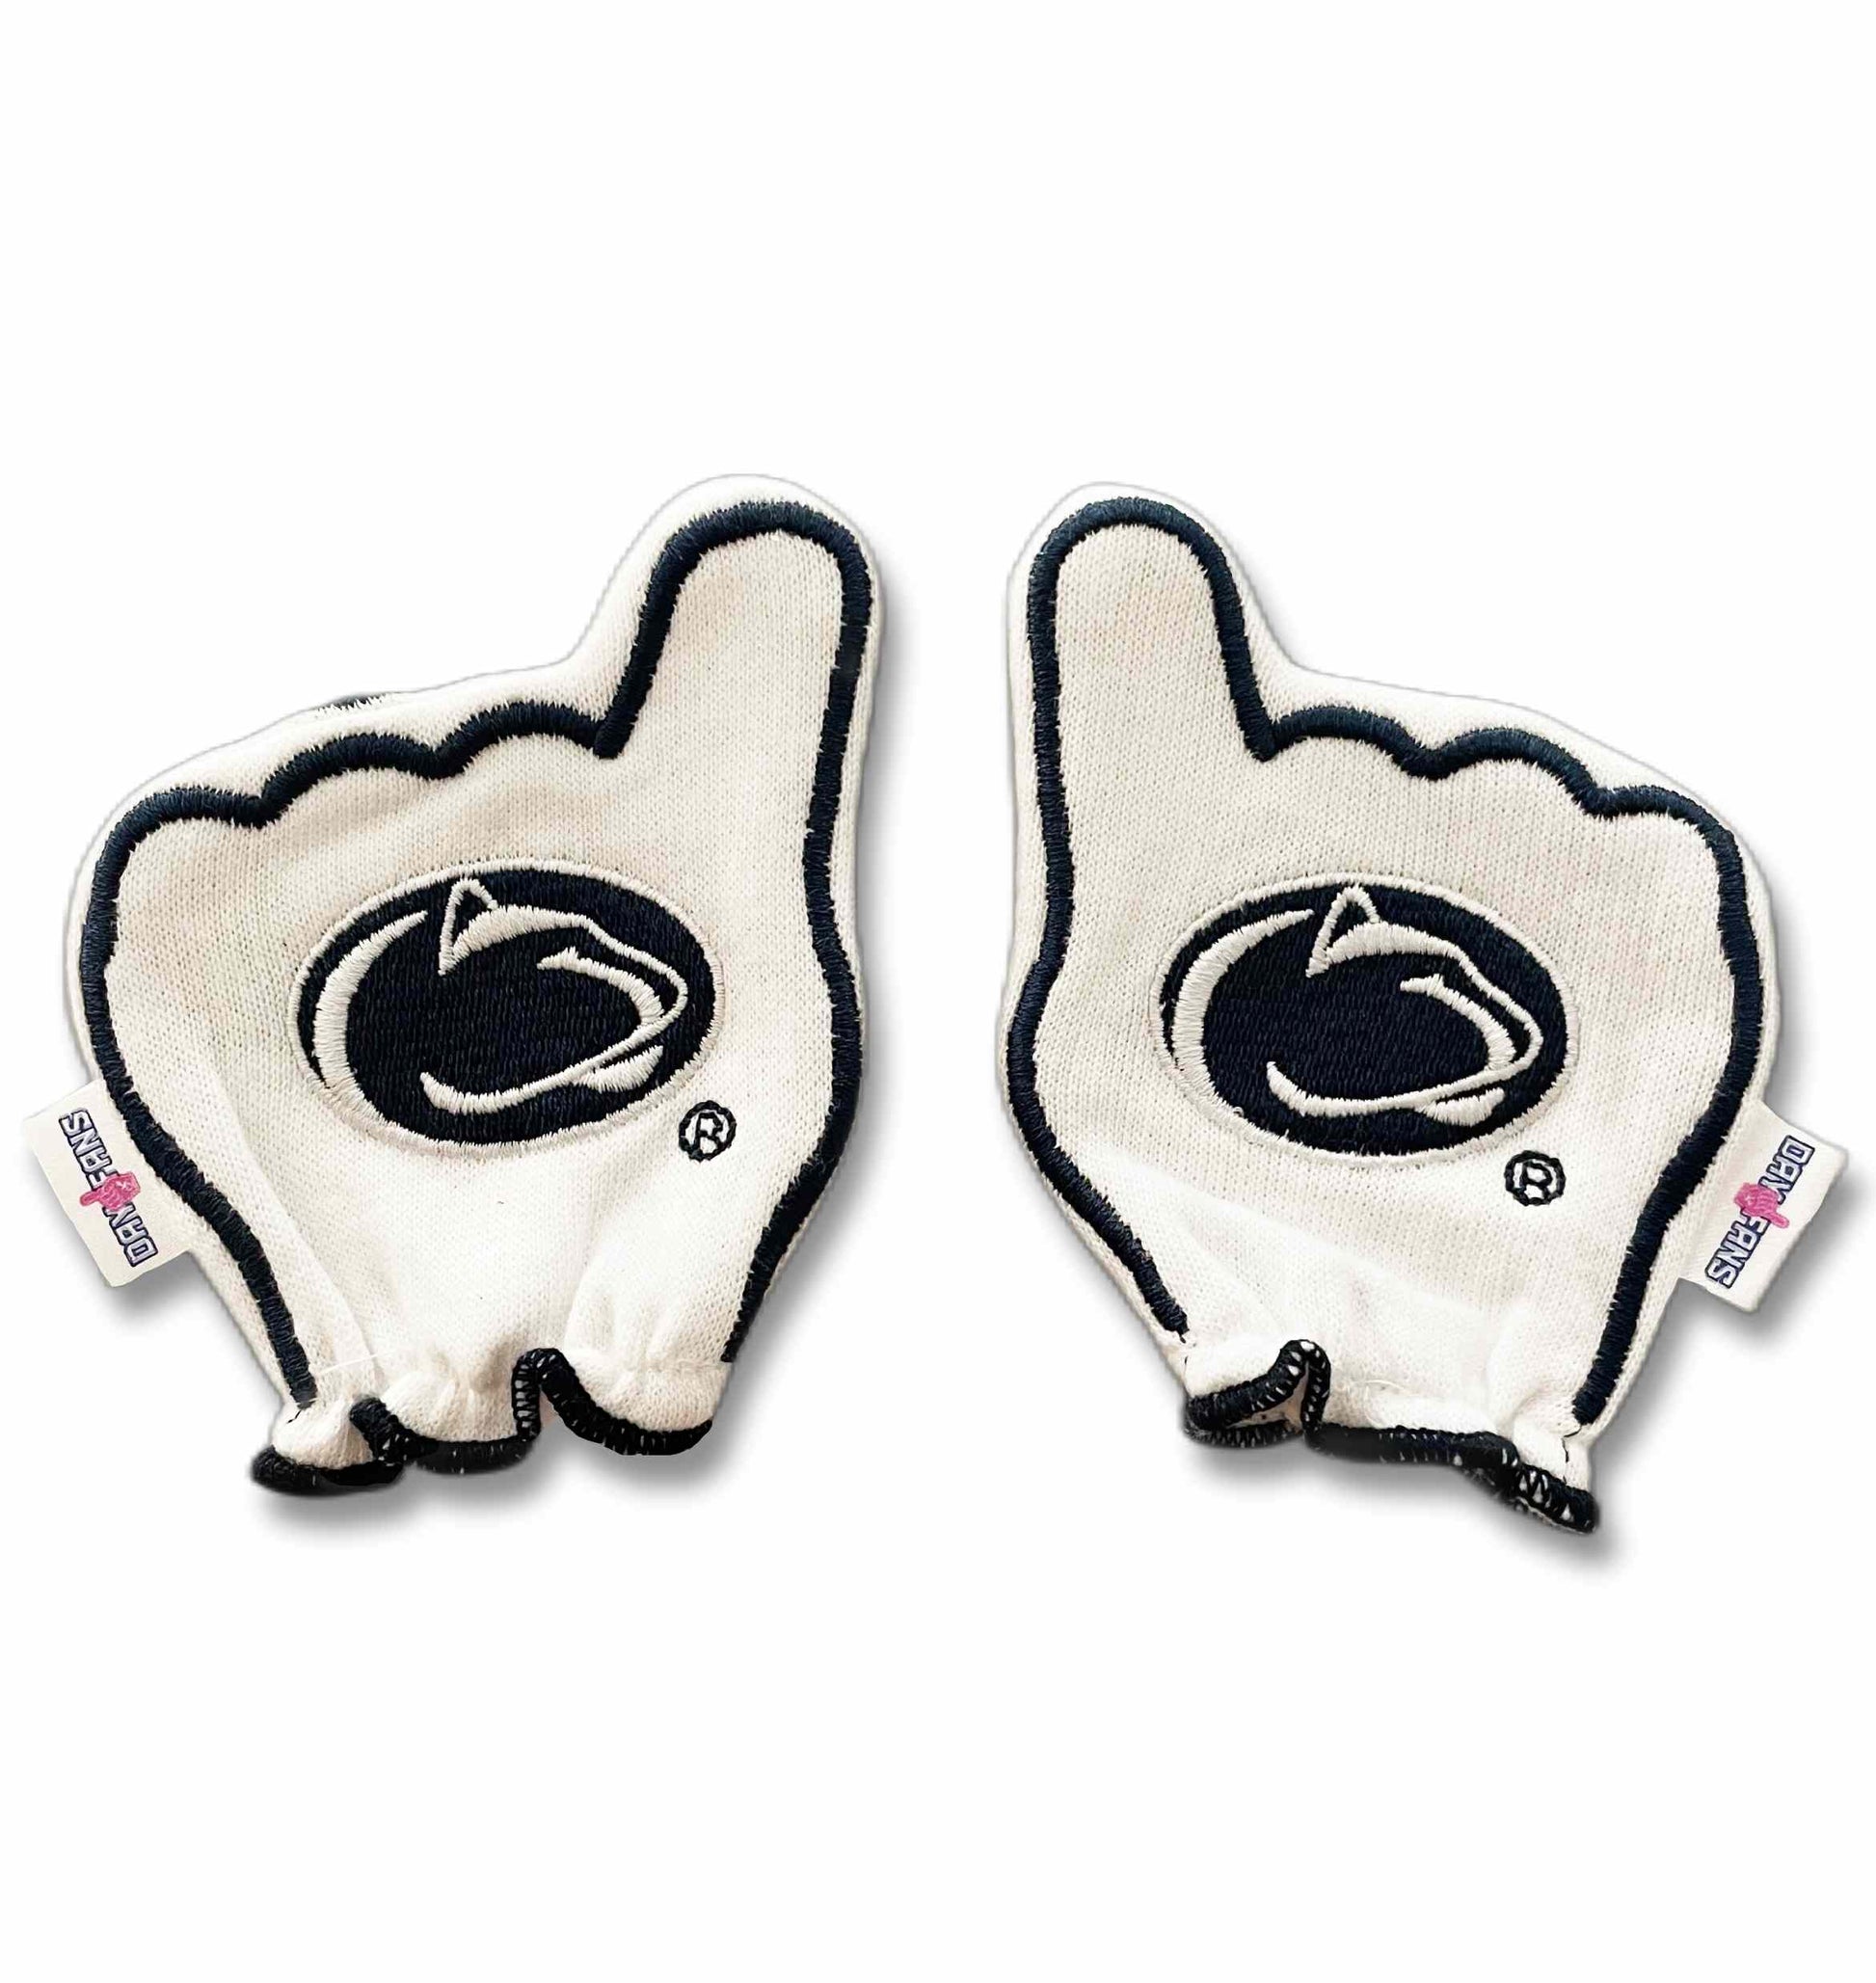 Penn State We Are FanMitts Baby Mittens White Back Pair